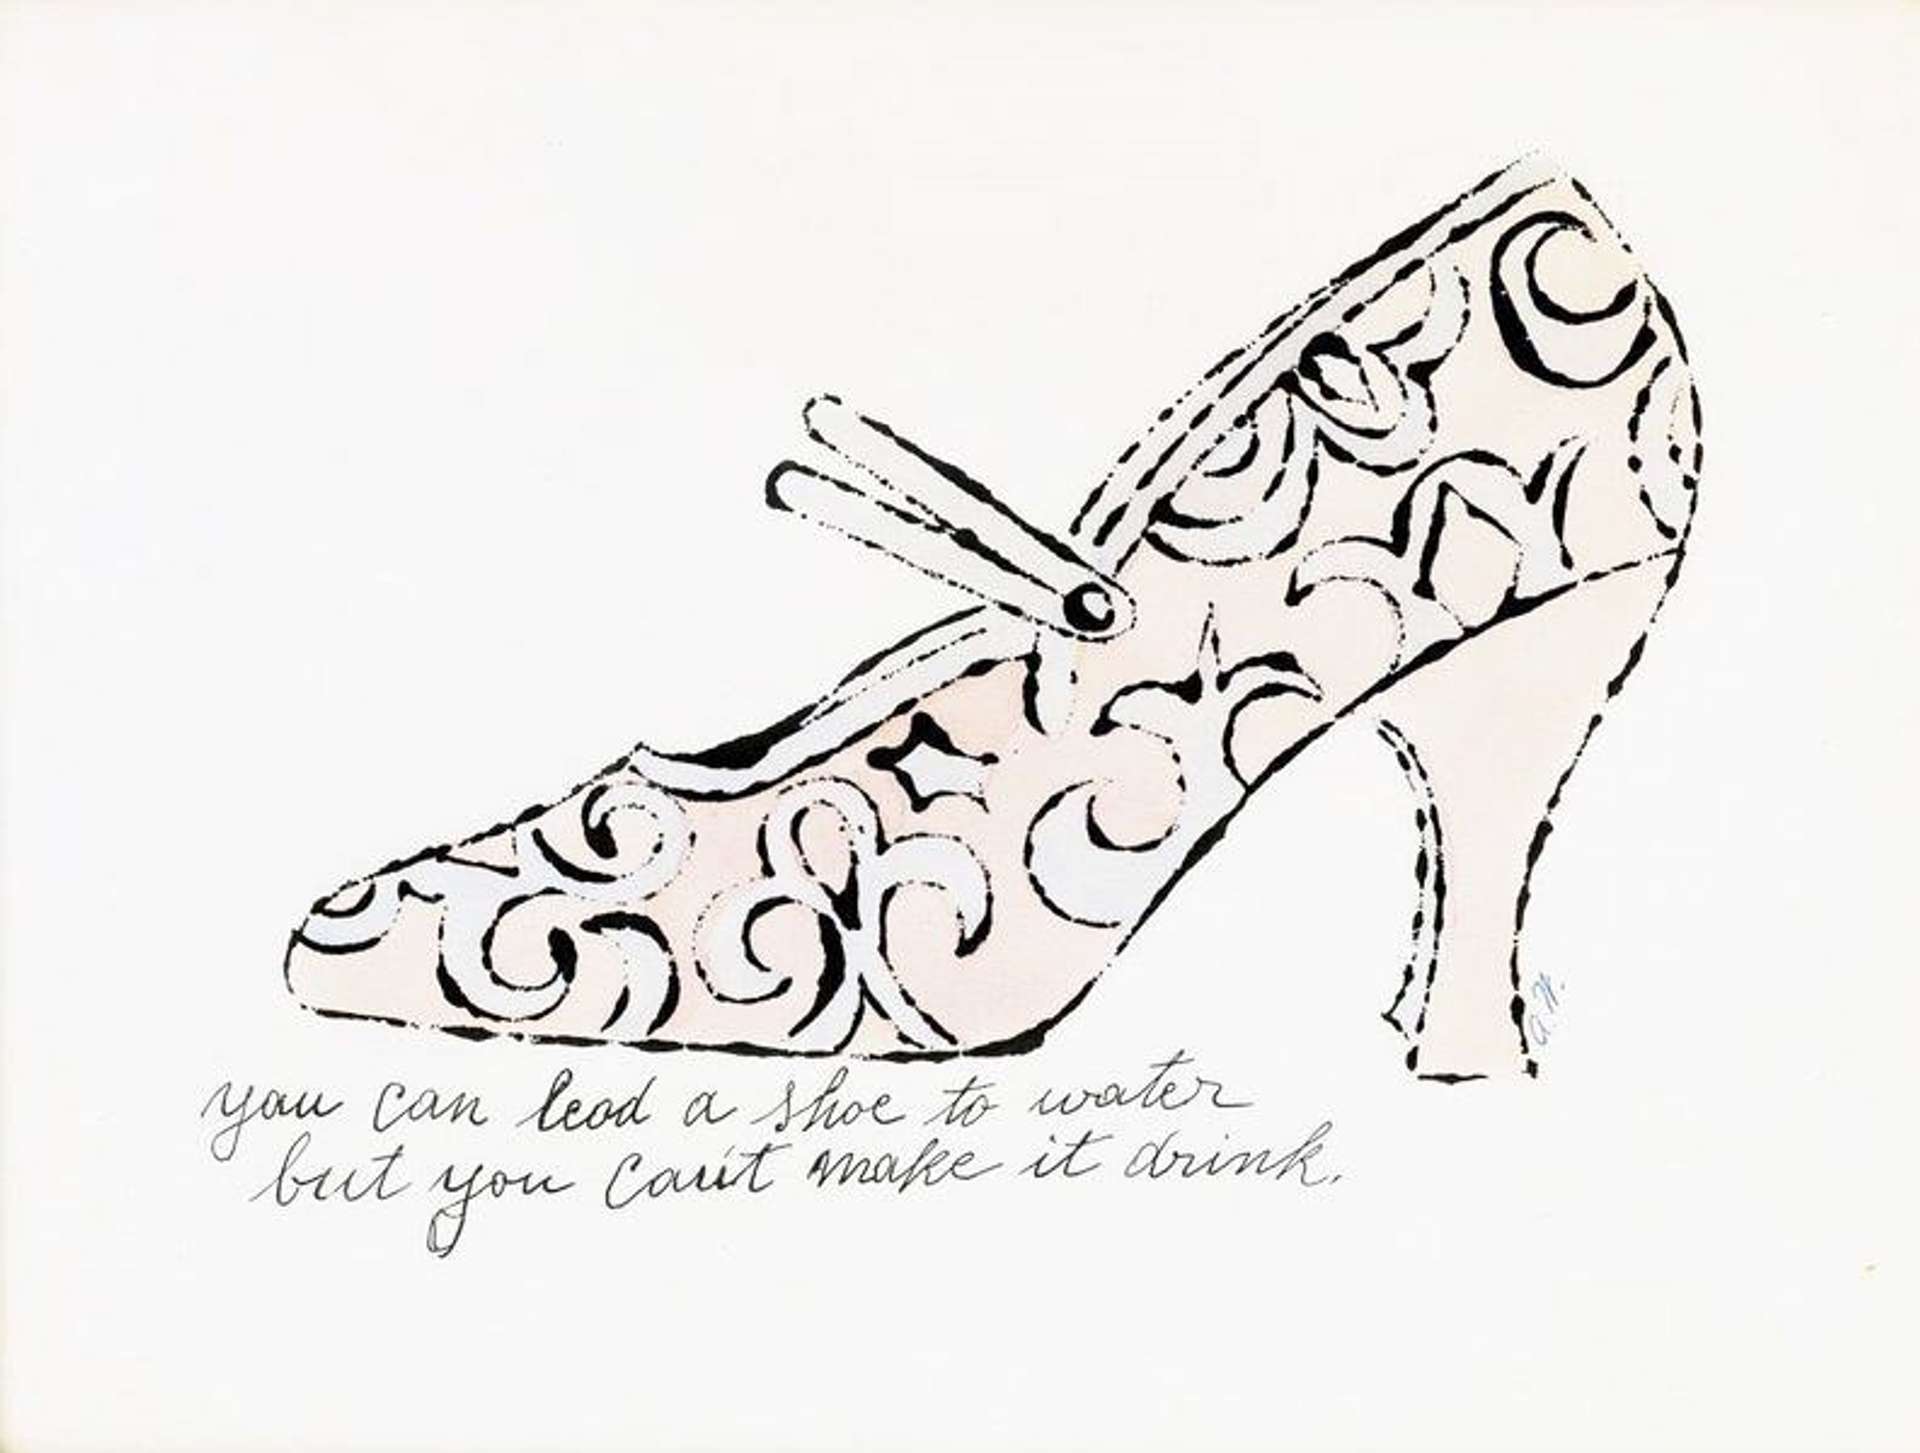 You Can Lead A Shoe To Water But You Can’t Make It Drink by Andy Warhol